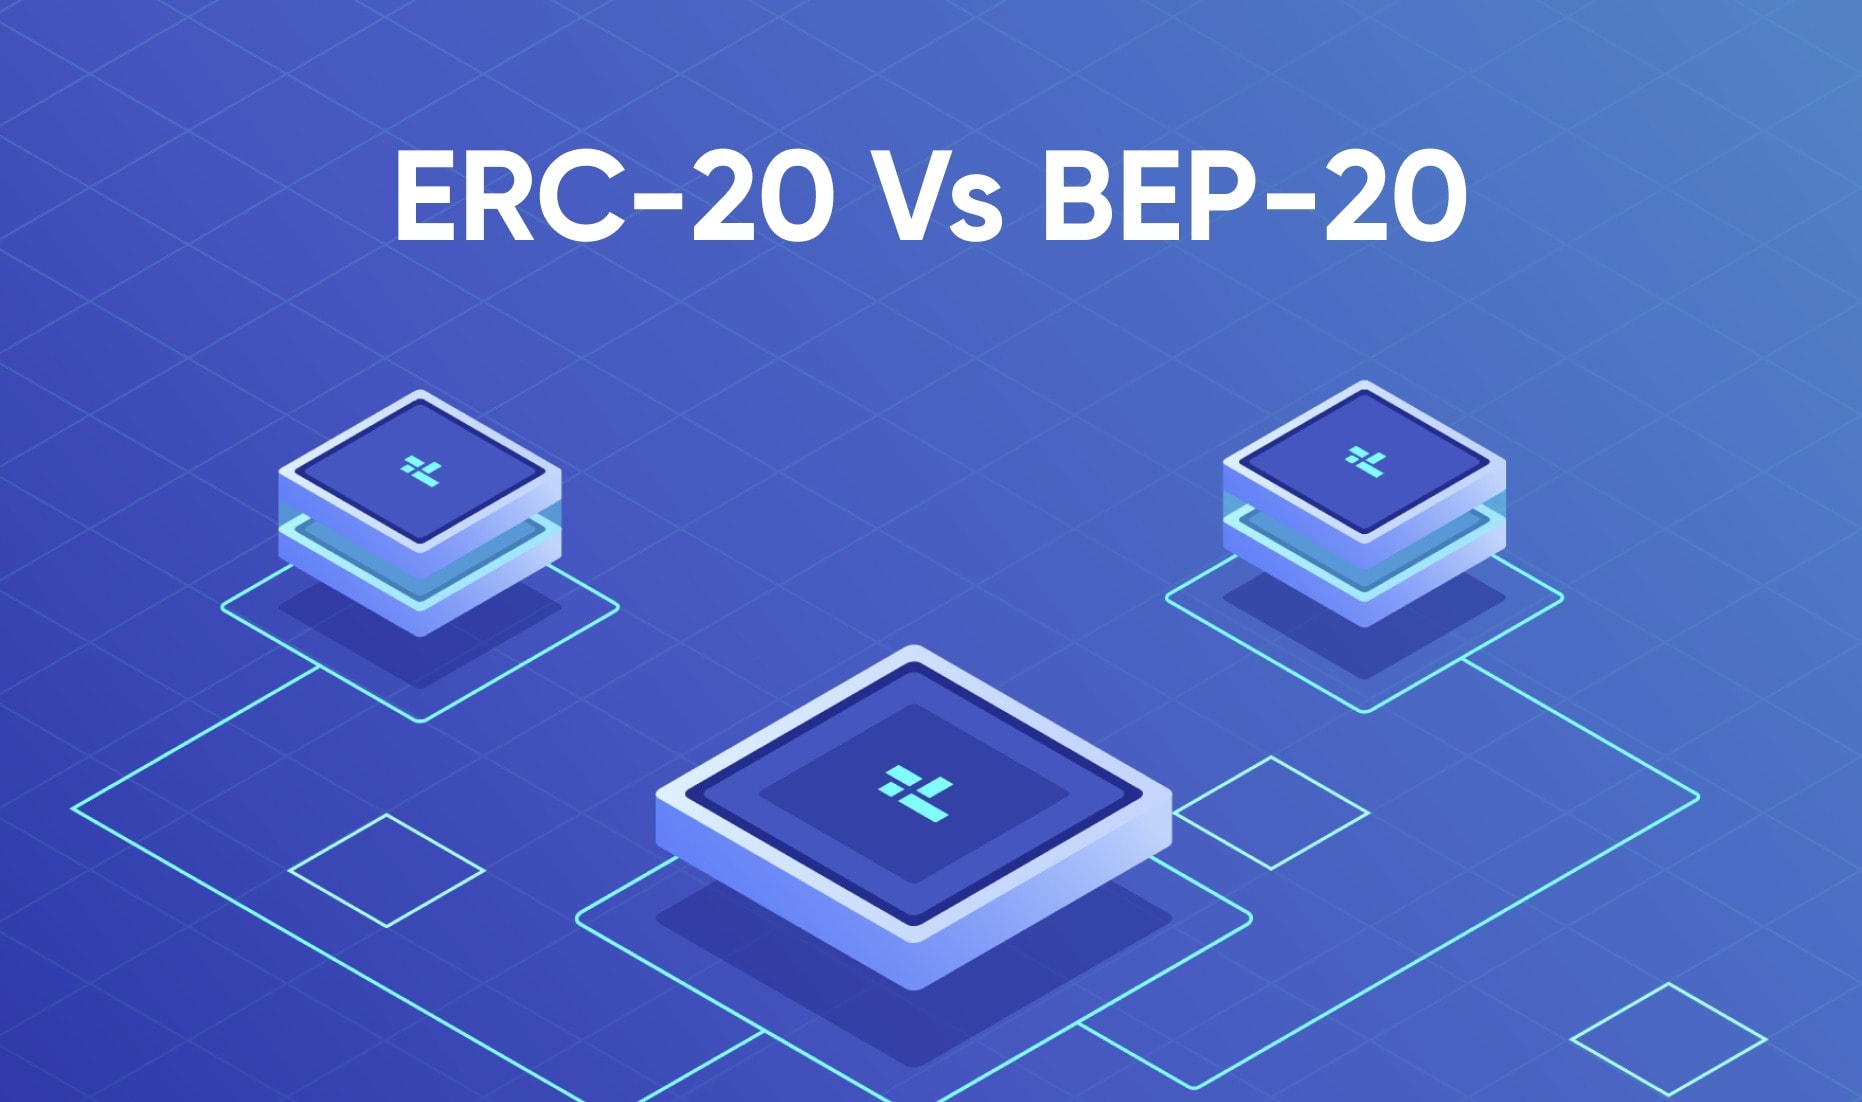 <strong>Différence entre normes BEP-2, BEP-20 et ERC-20</strong>